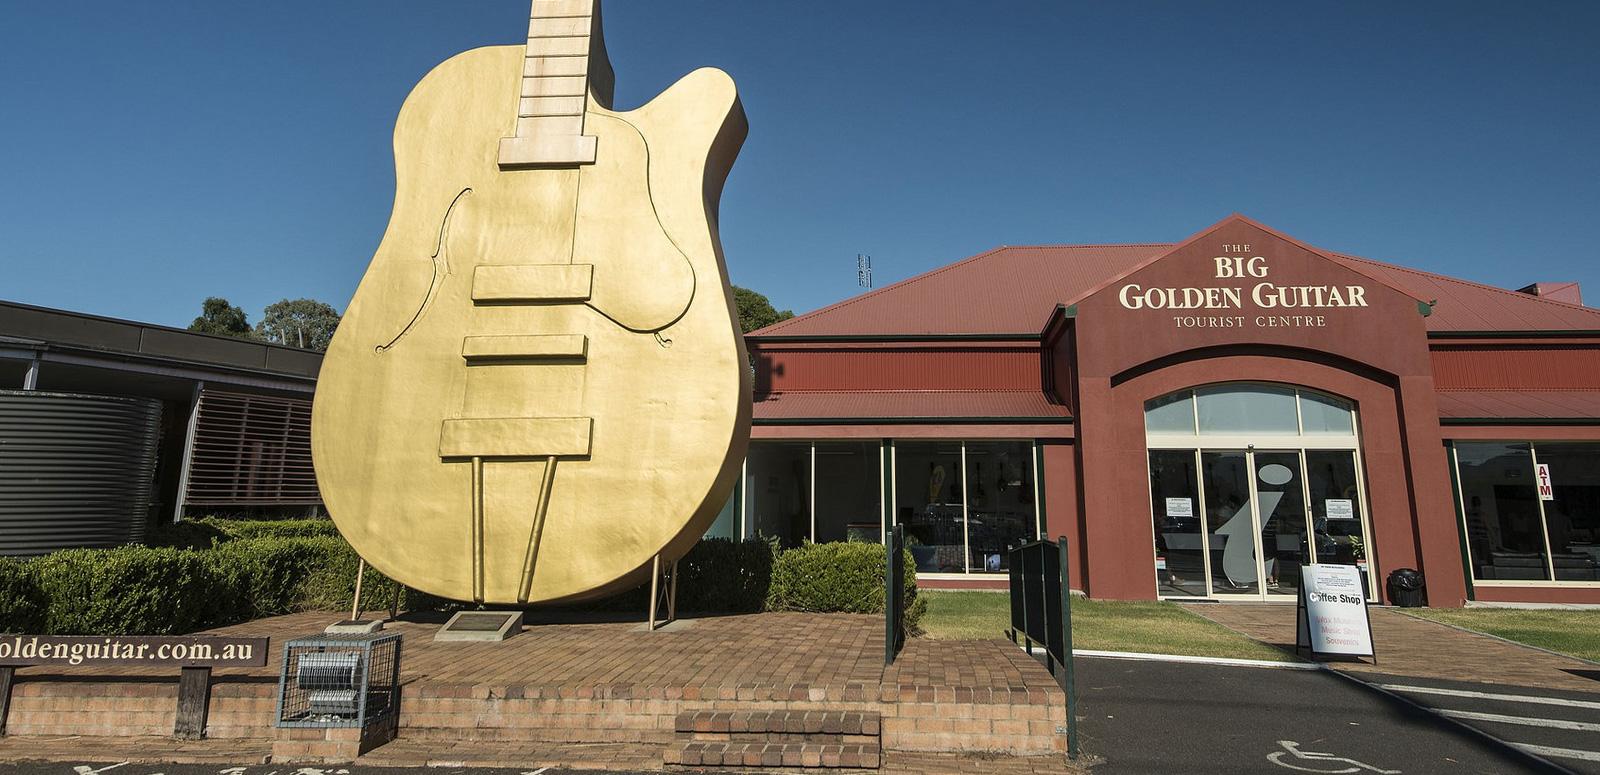 Image of big golden guitar and visitor centre in Tamworth